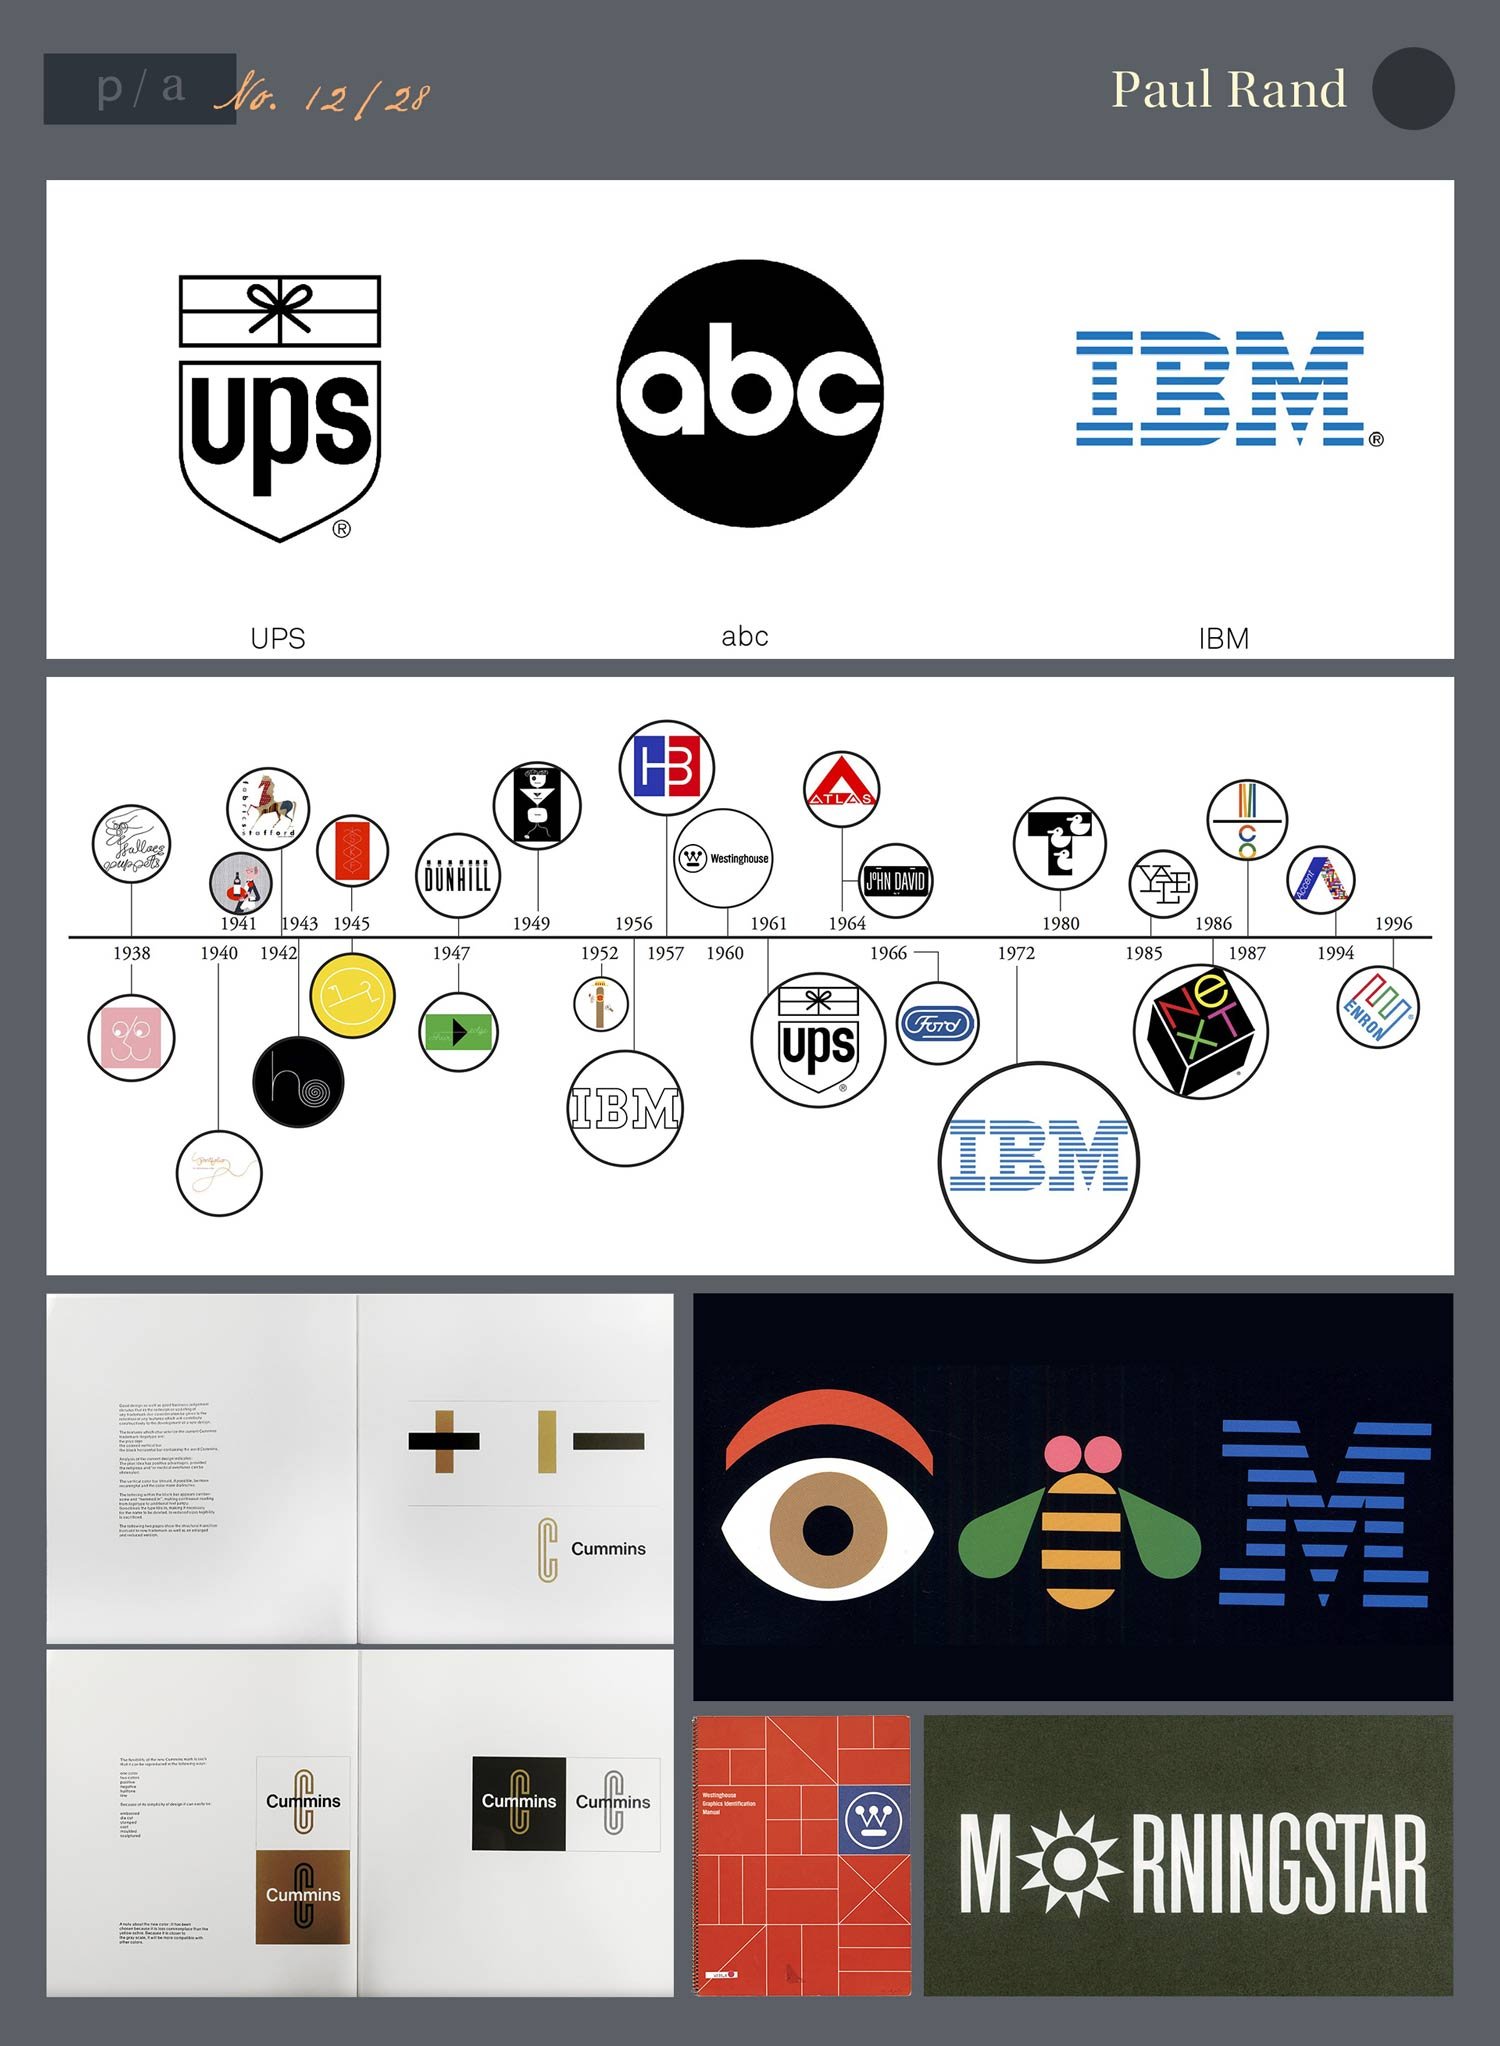 Examples of Paul Rand's Work, including UPS, ABC, and IBM logos